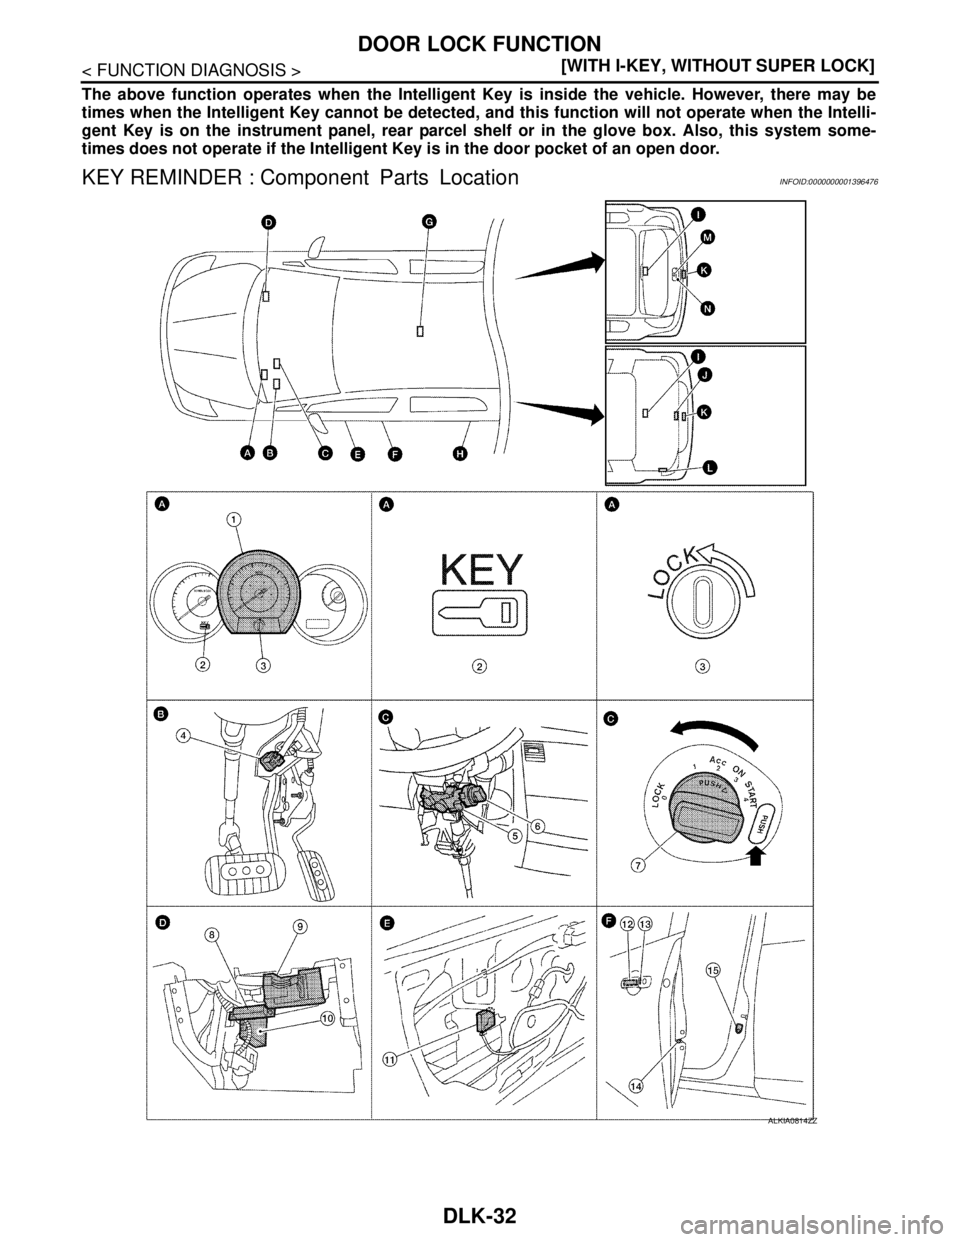 NISSAN TIIDA 2007  Service Repair Manual DLK-32
< FUNCTION DIAGNOSIS >[WITH I-KEY, WITHOUT SUPER LOCK]
DOOR LOCK FUNCTION
The above function operates when the Intelligent Key is inside the vehicle. However, there may be
times when the Intell